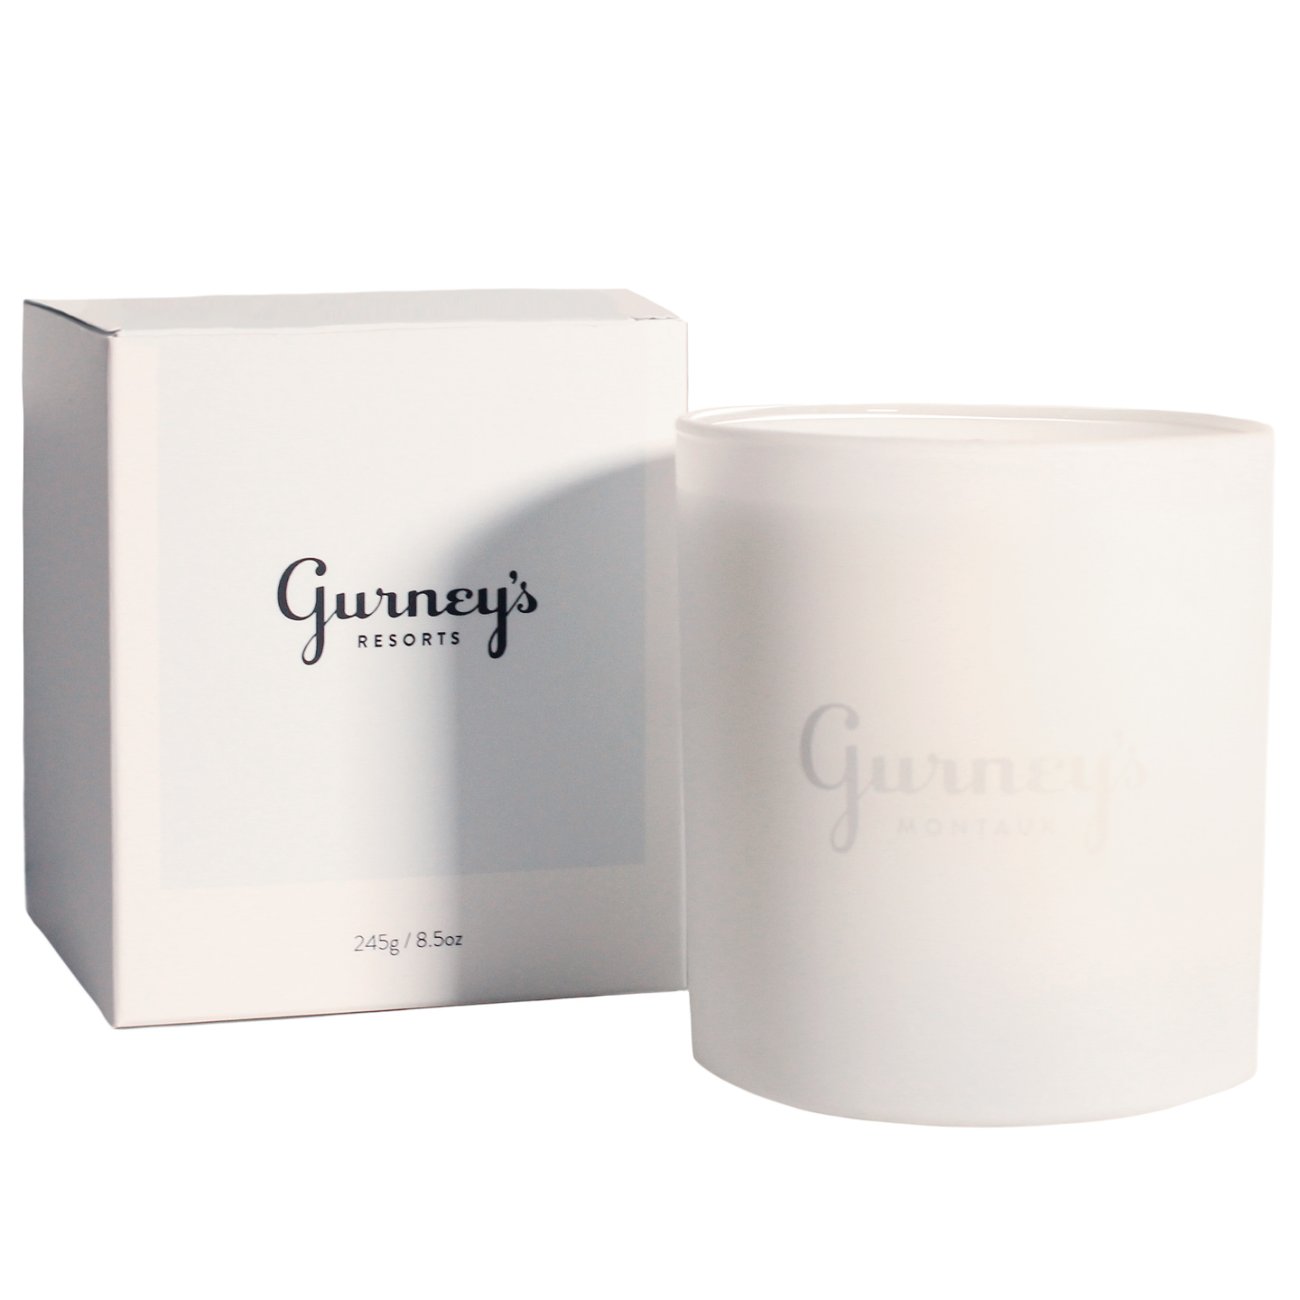 The Gurney's Resorts Signature Candle and Box